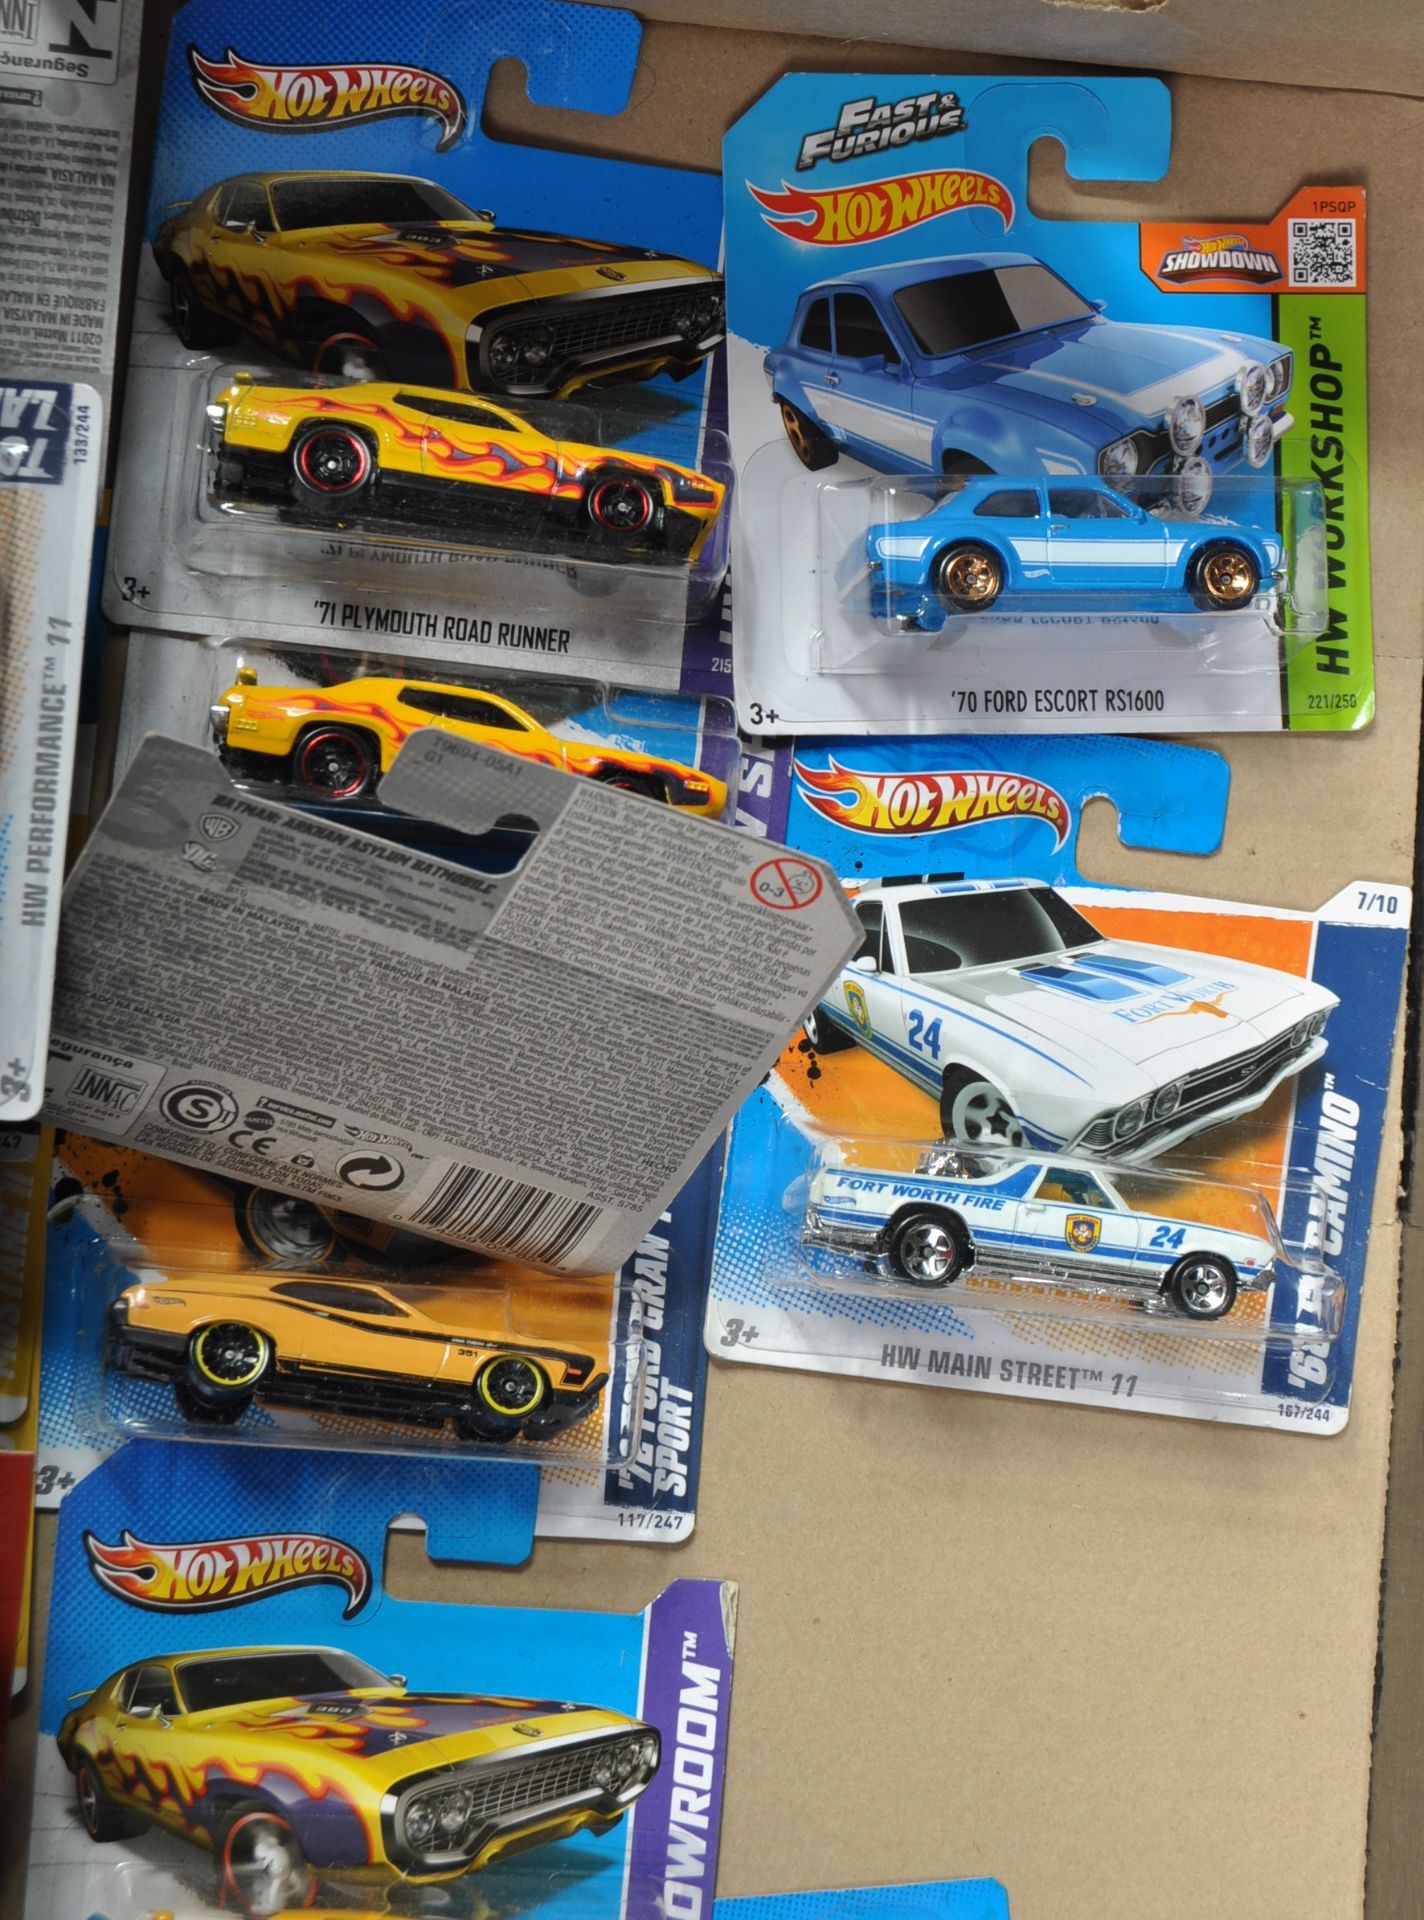 COLLECTION OF ASSORTED CARDED MATTEL HOT WHEELS DIECAST MODELS - Image 5 of 6